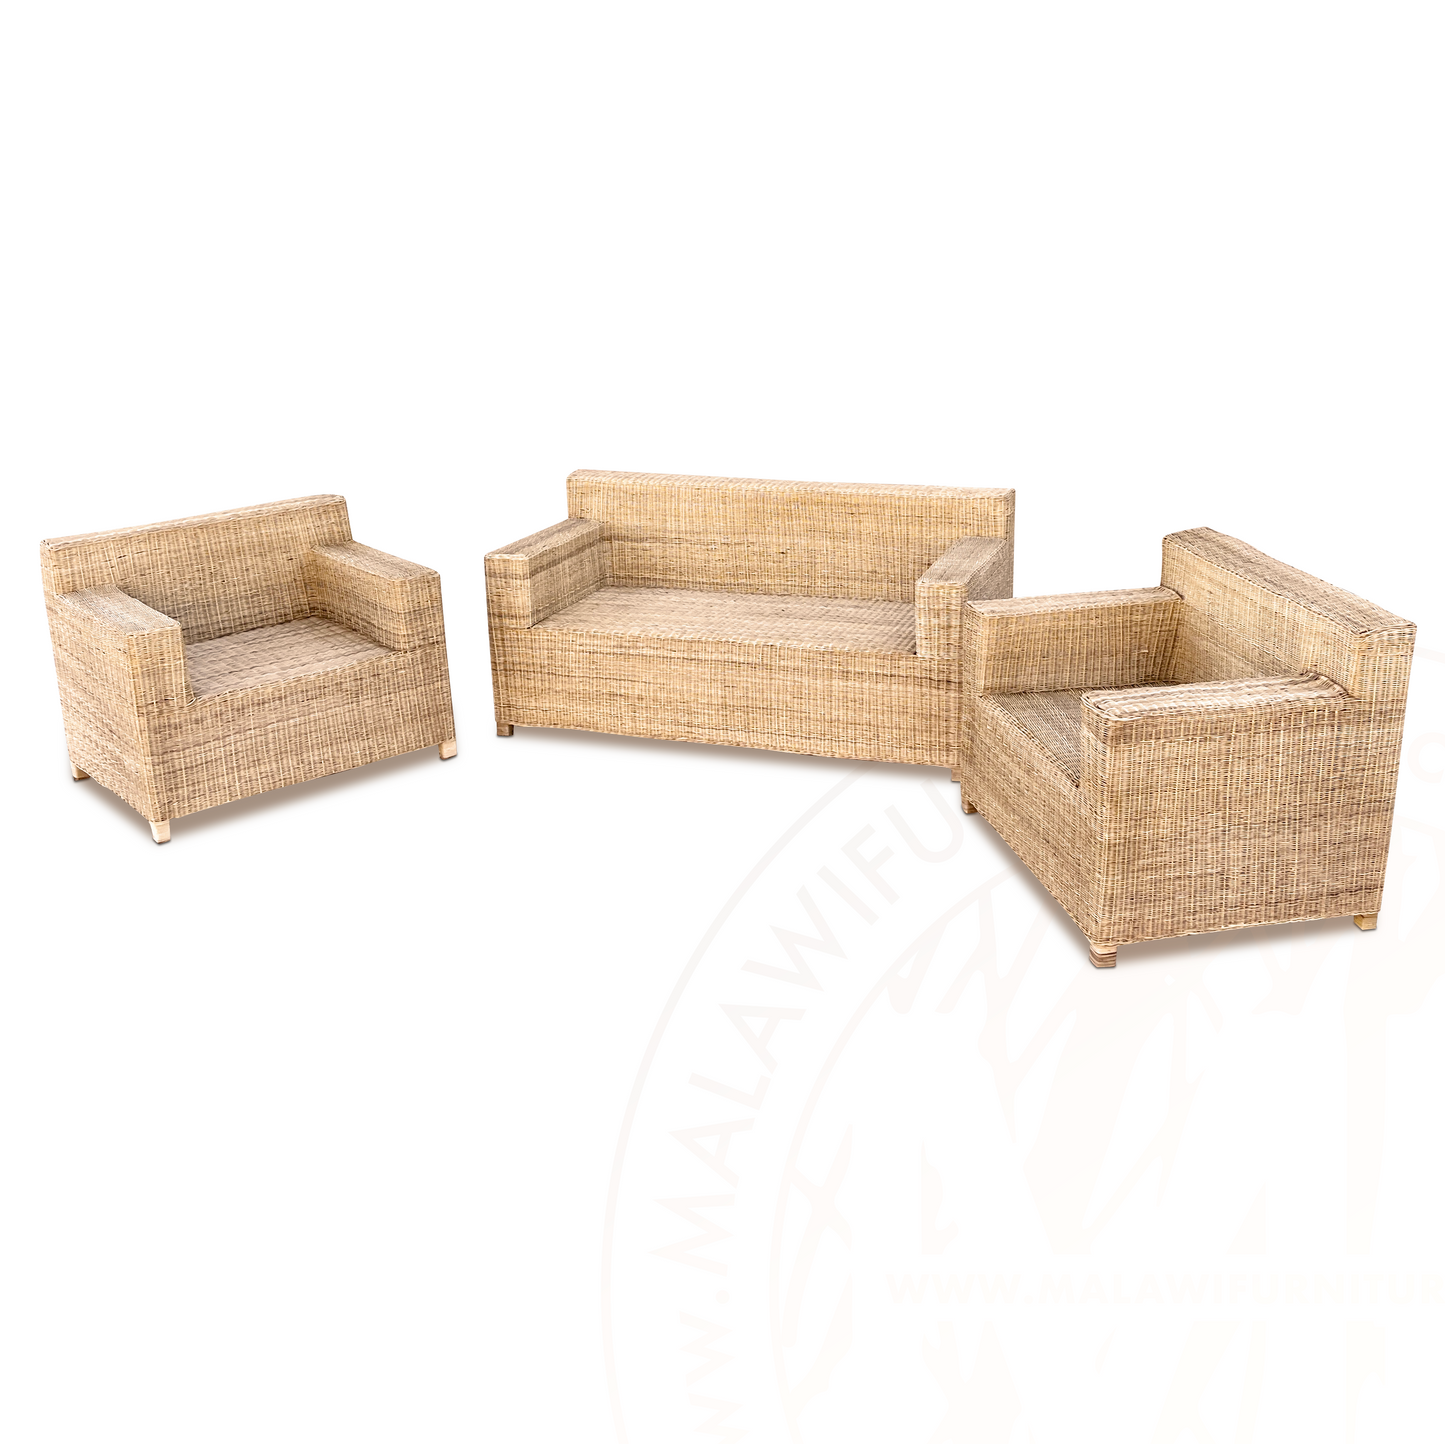 BOX Malawi Couch Set (Option 2) hand weaved woven rattan cane chair malawi with cushion